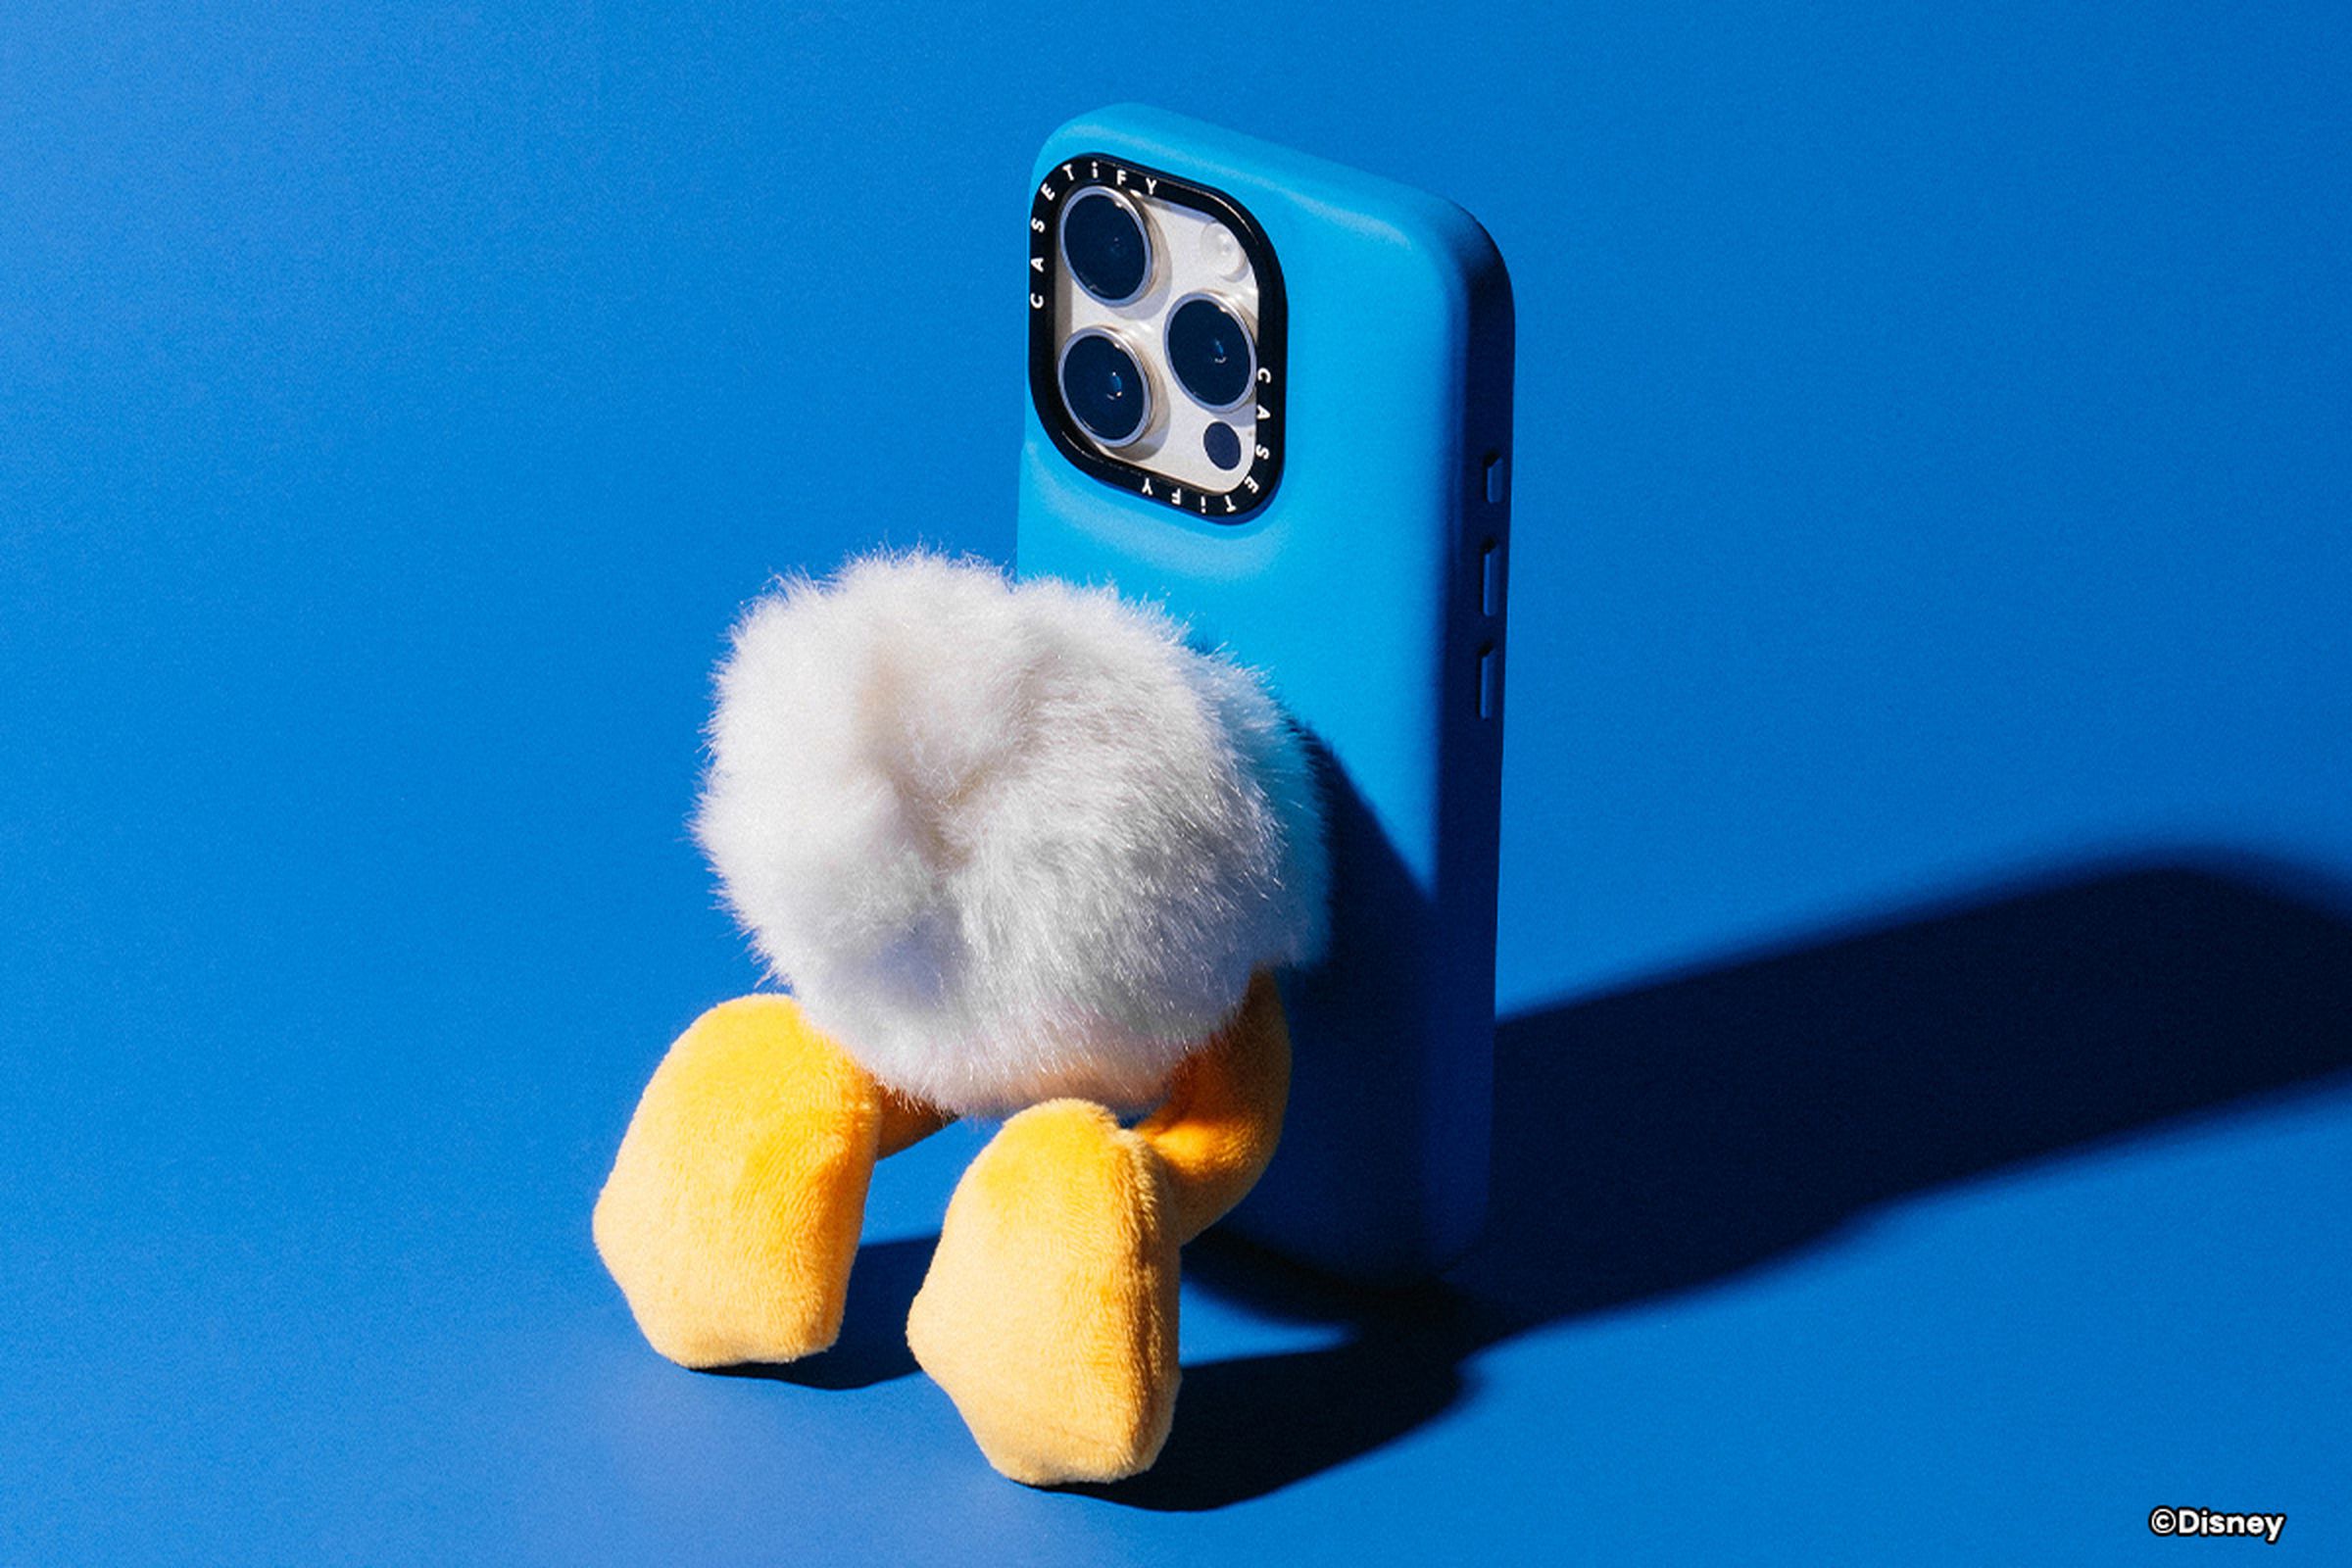 A phone case featuring Donald Duck’s protruding duck butt and floppy feet.